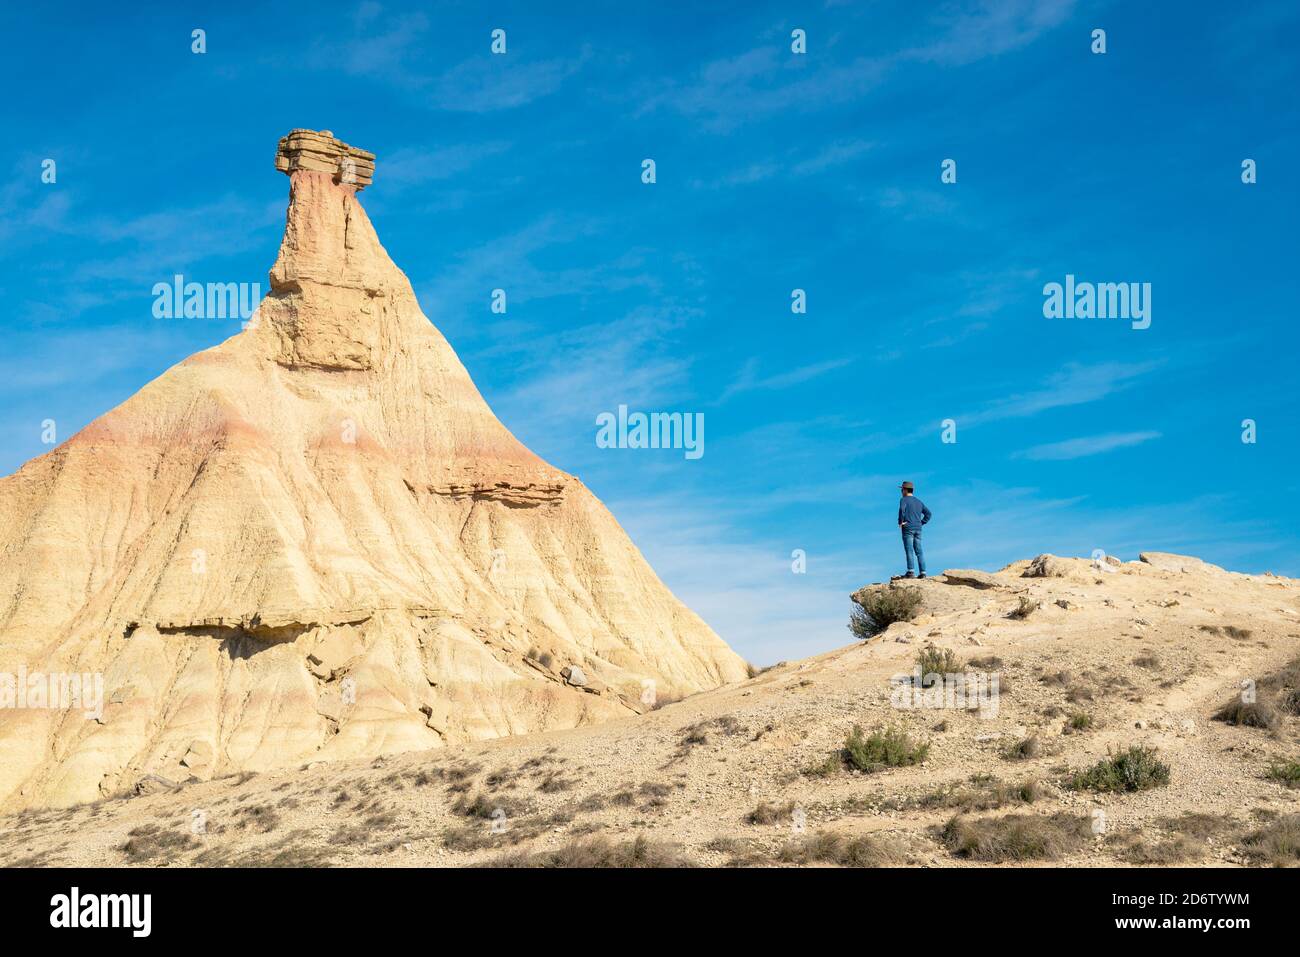 Rear view of a man with hat and sunglasses standing on desert dunes against a rock peak Stock Photo